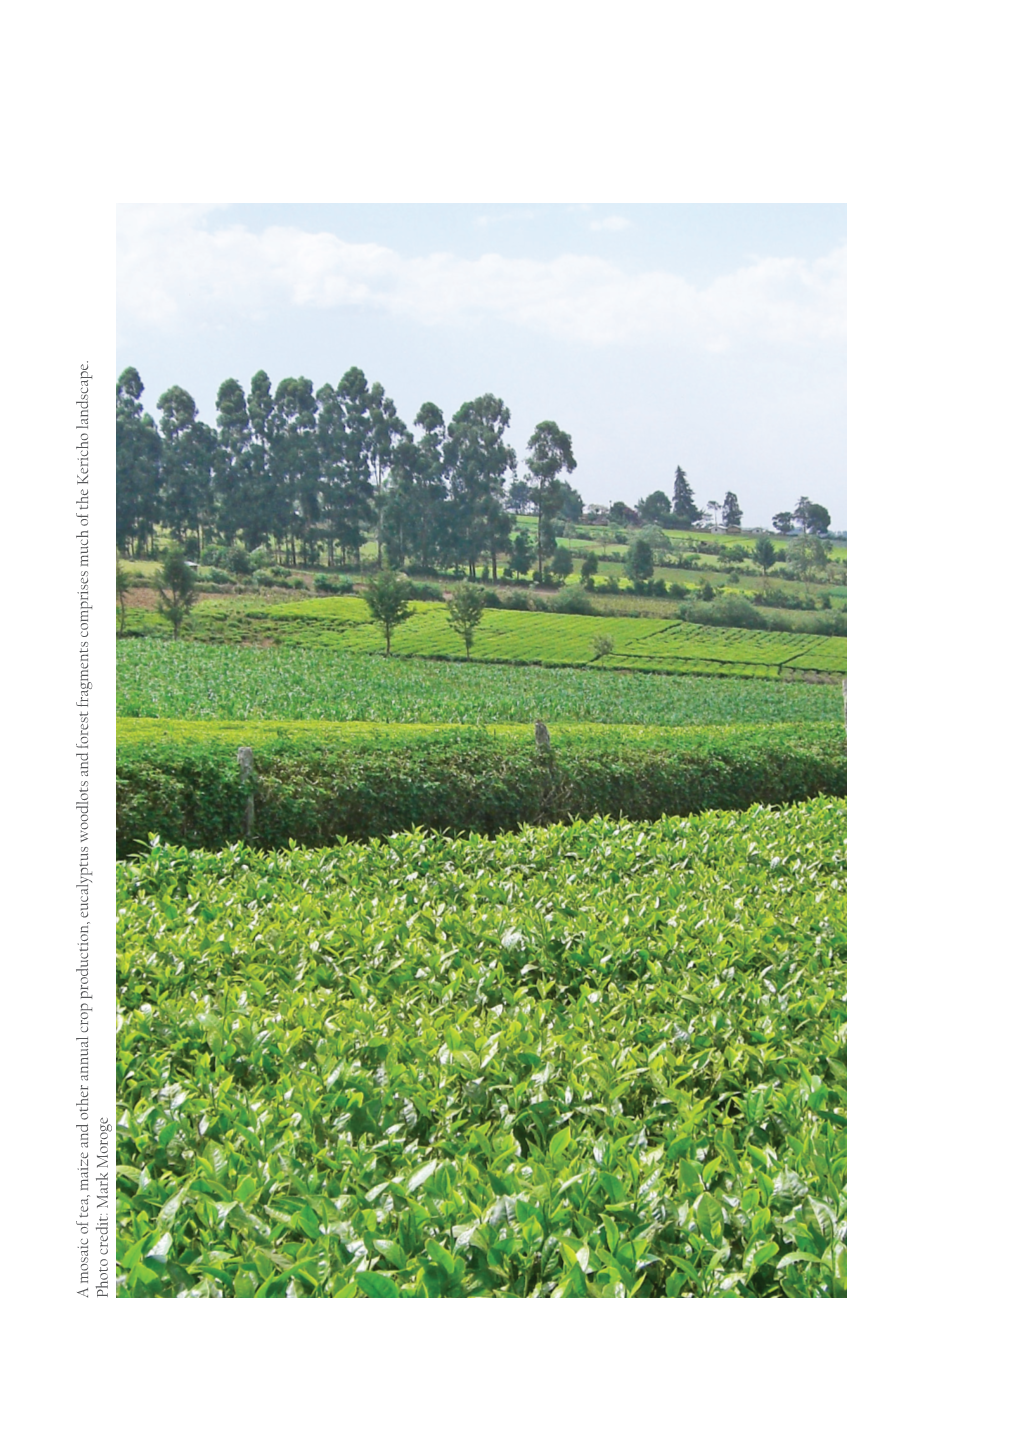 A Mosaic of Tea, Maize and Other Annual Crop Production, Eucalyptus Woodlots and Forest Fragments Comprises Much of the Kericho Landscape